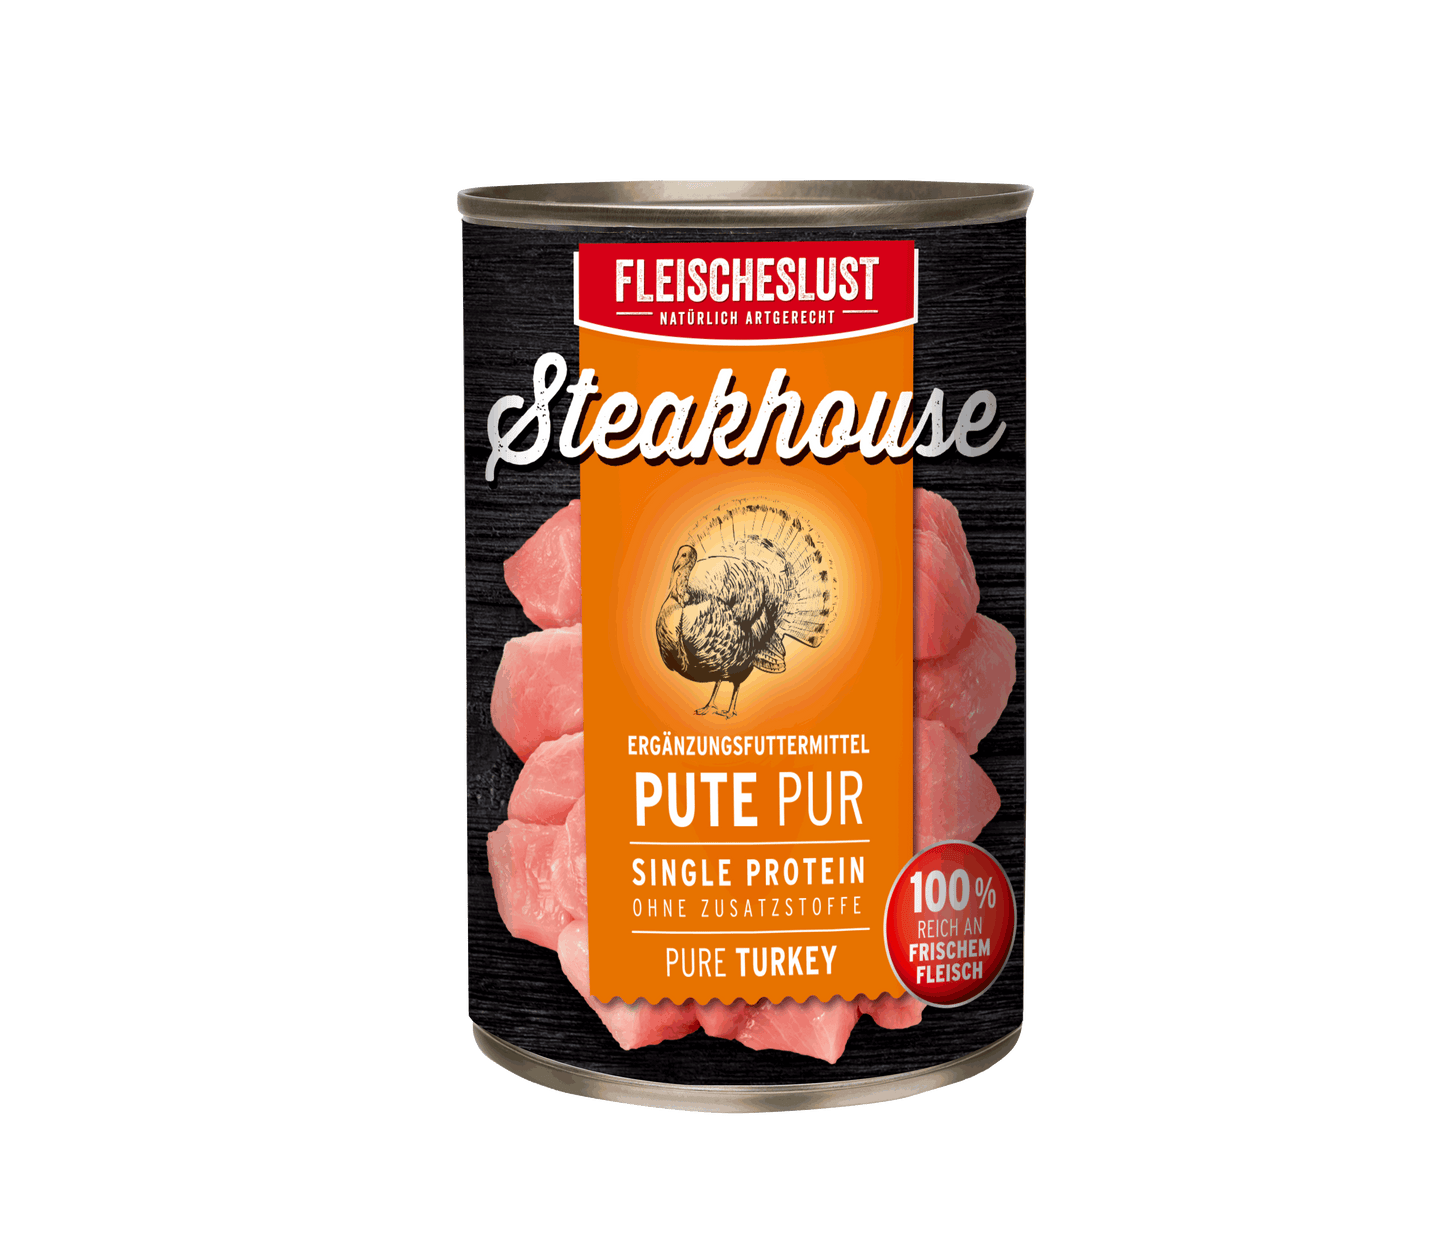 Steakhouse Pute Pur